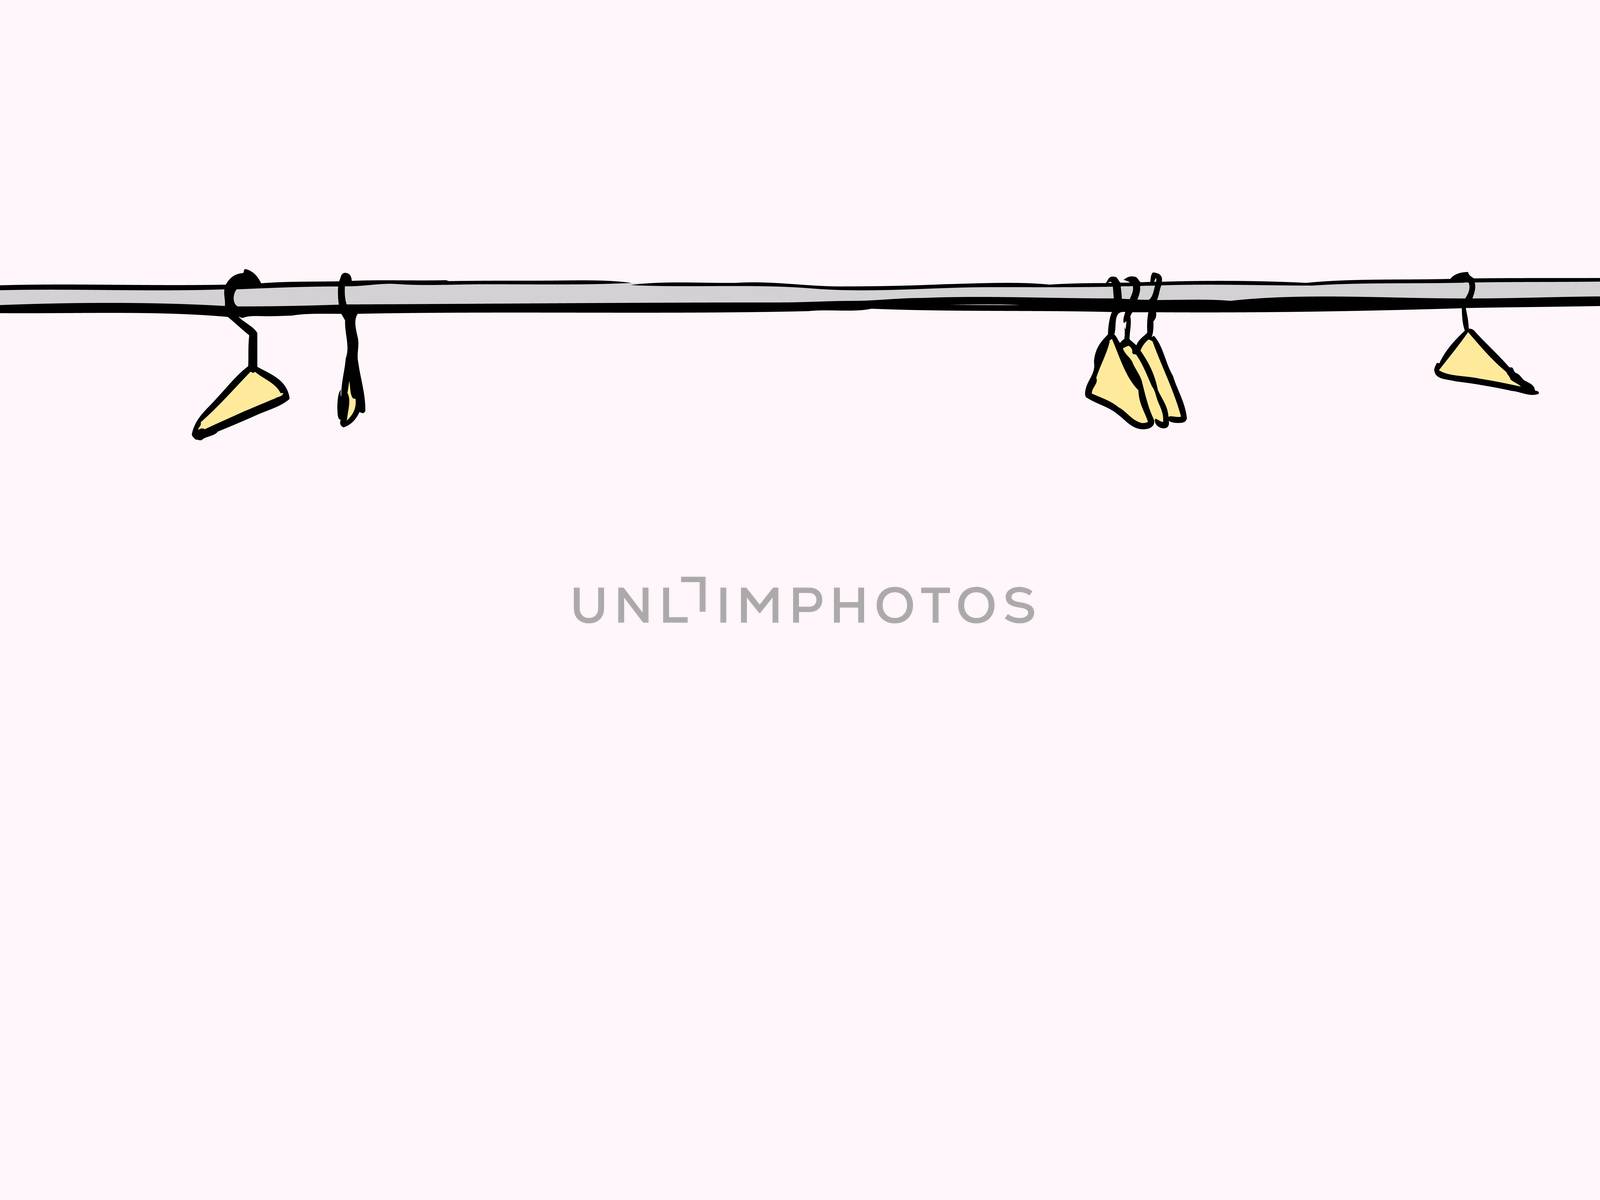 Empty Clothes Hangers on Rod by TheBlackRhino